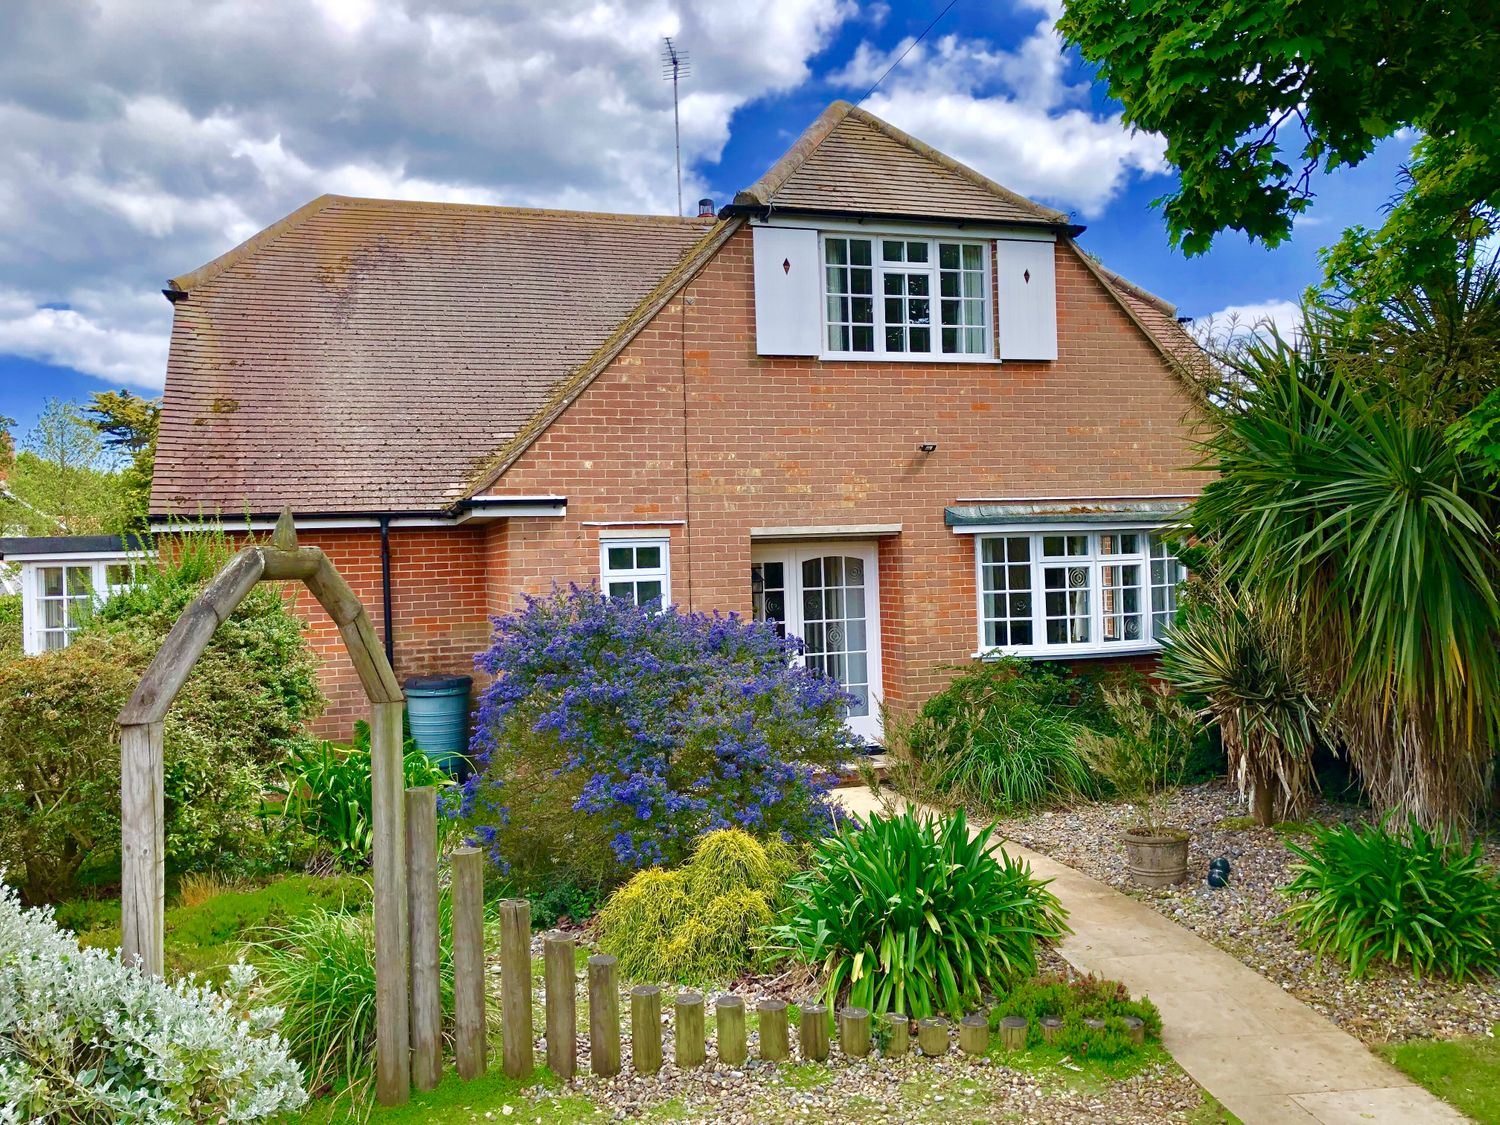 Holiday Cottages in Suffolk: Rippleway, Walberswick | sykescottages.co.uk